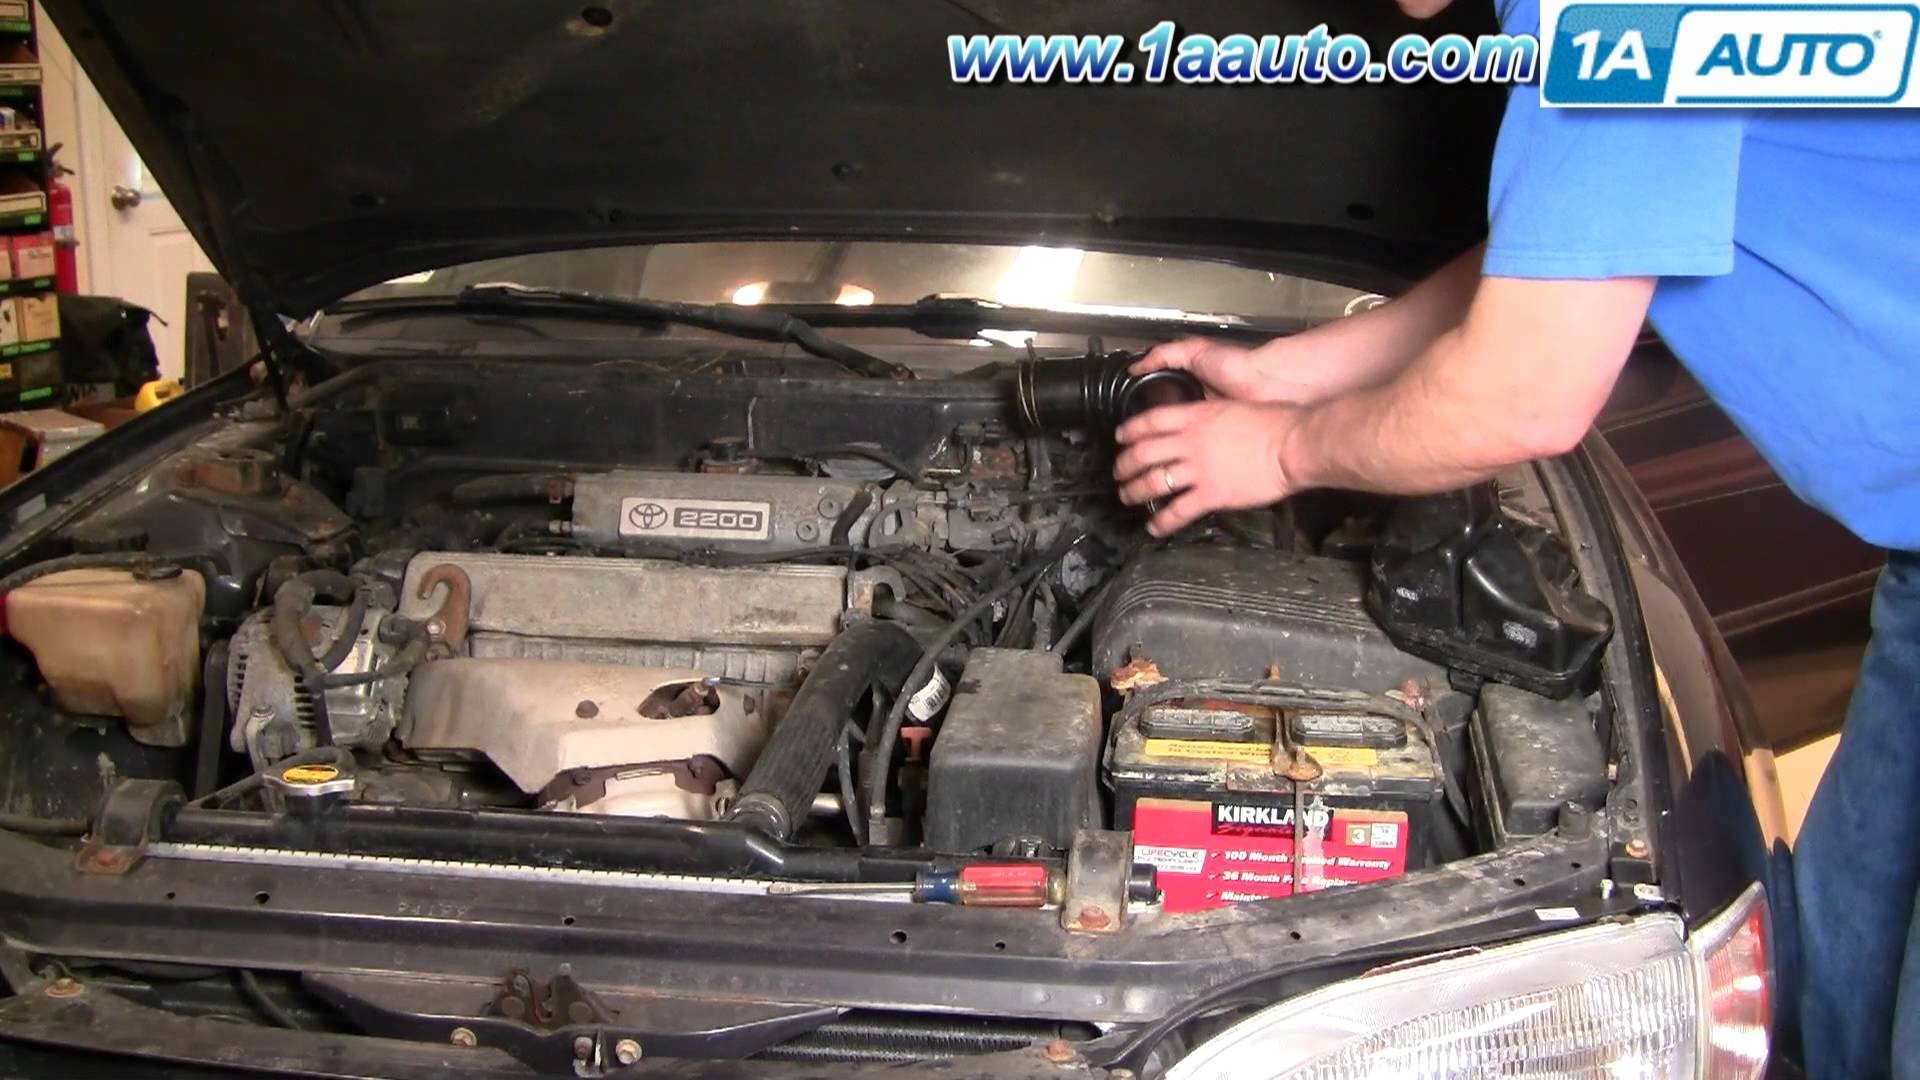 1997 toyota Avalon Engine Diagram How to Install Replace Engine Air Intake Hose toyota Camry 2 2l 95 Of 1997 toyota Avalon Engine Diagram